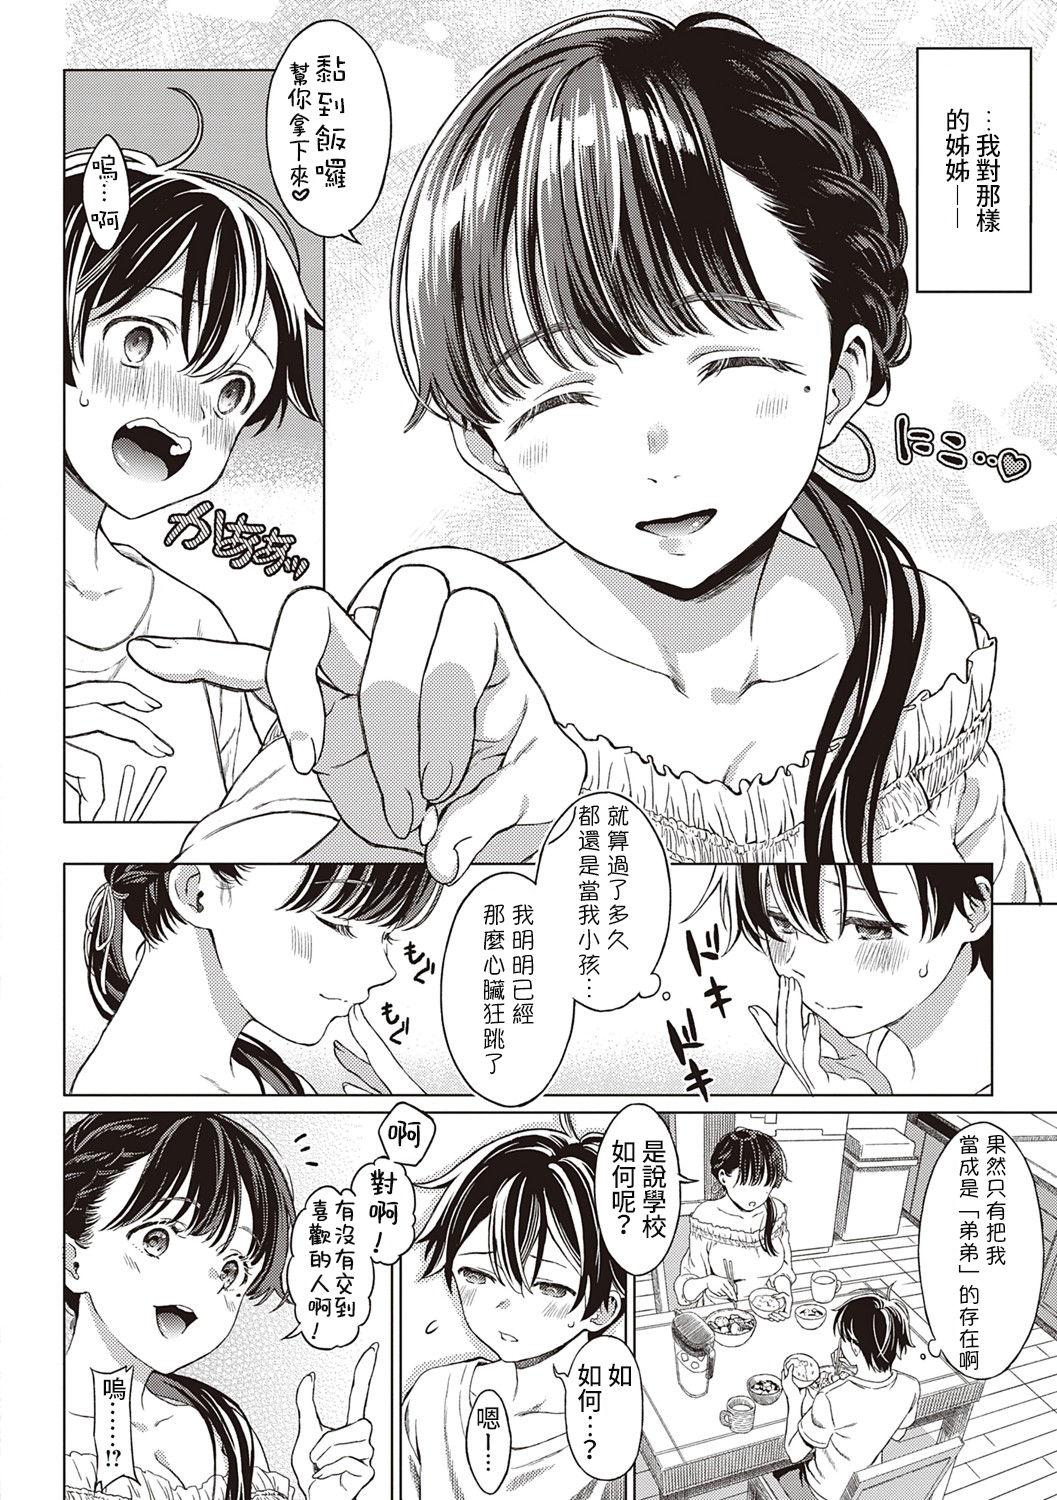 Squirting Tokubetsu ni Naru Hi - The day to be special. Super - Page 5